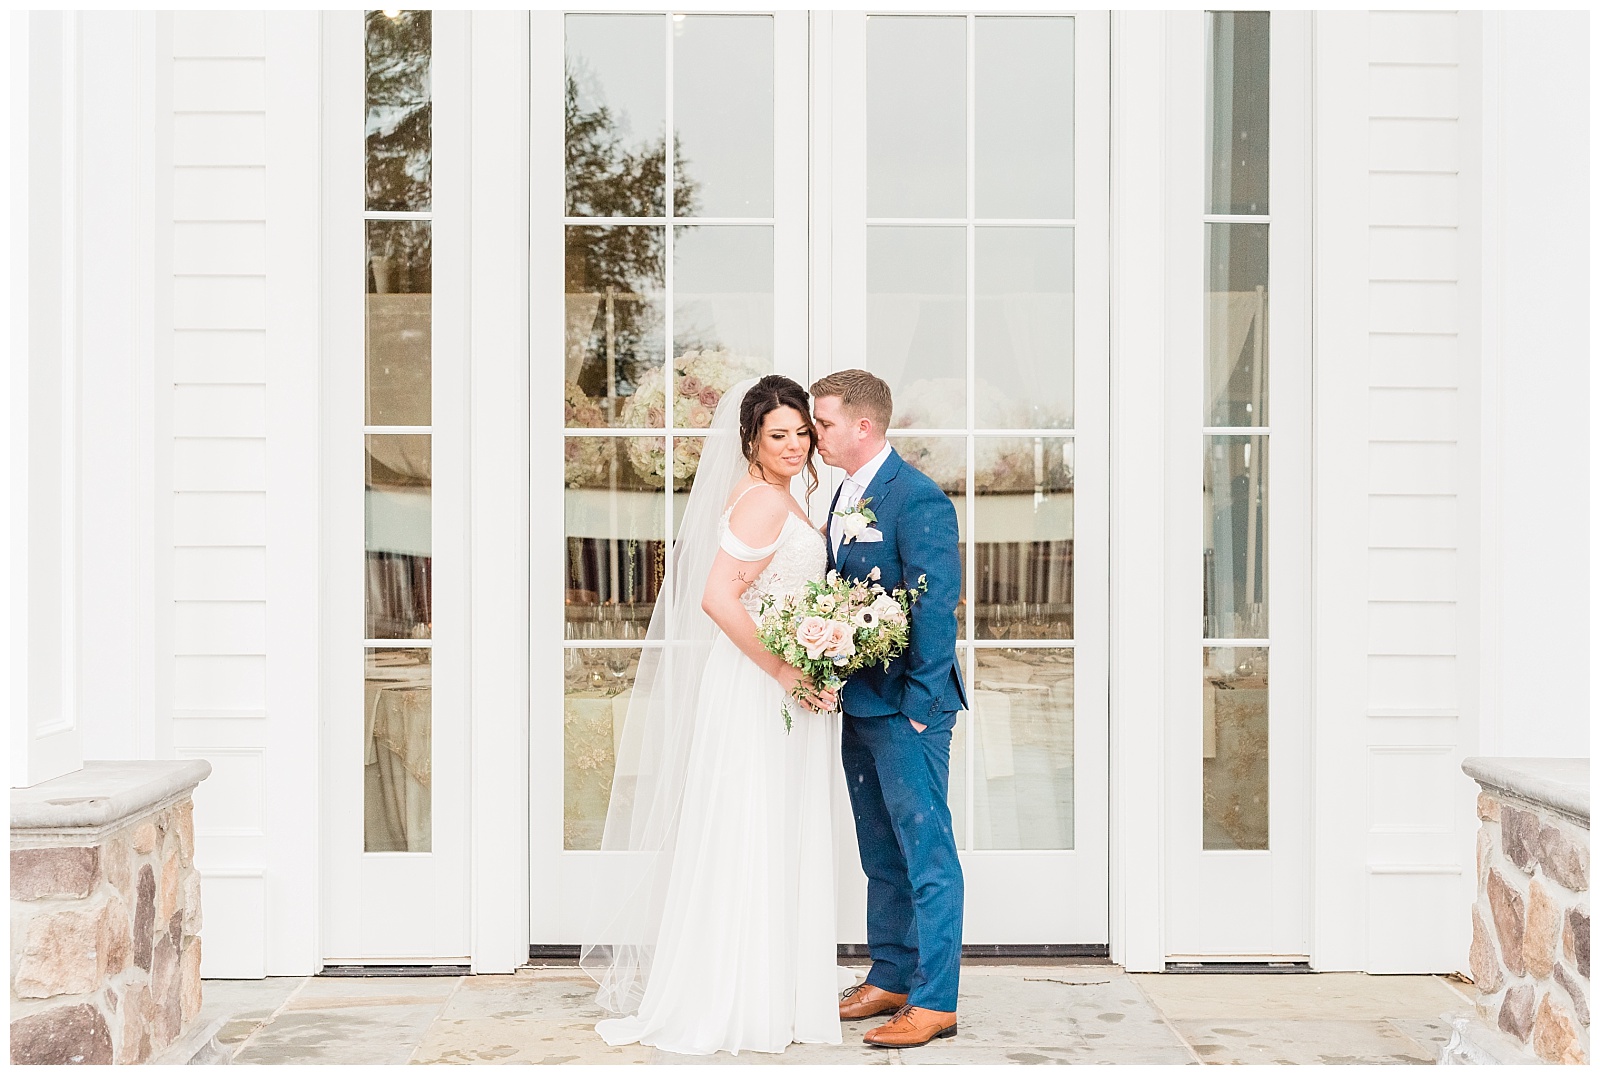 Groom kisses the brides cheek in front of french doors.